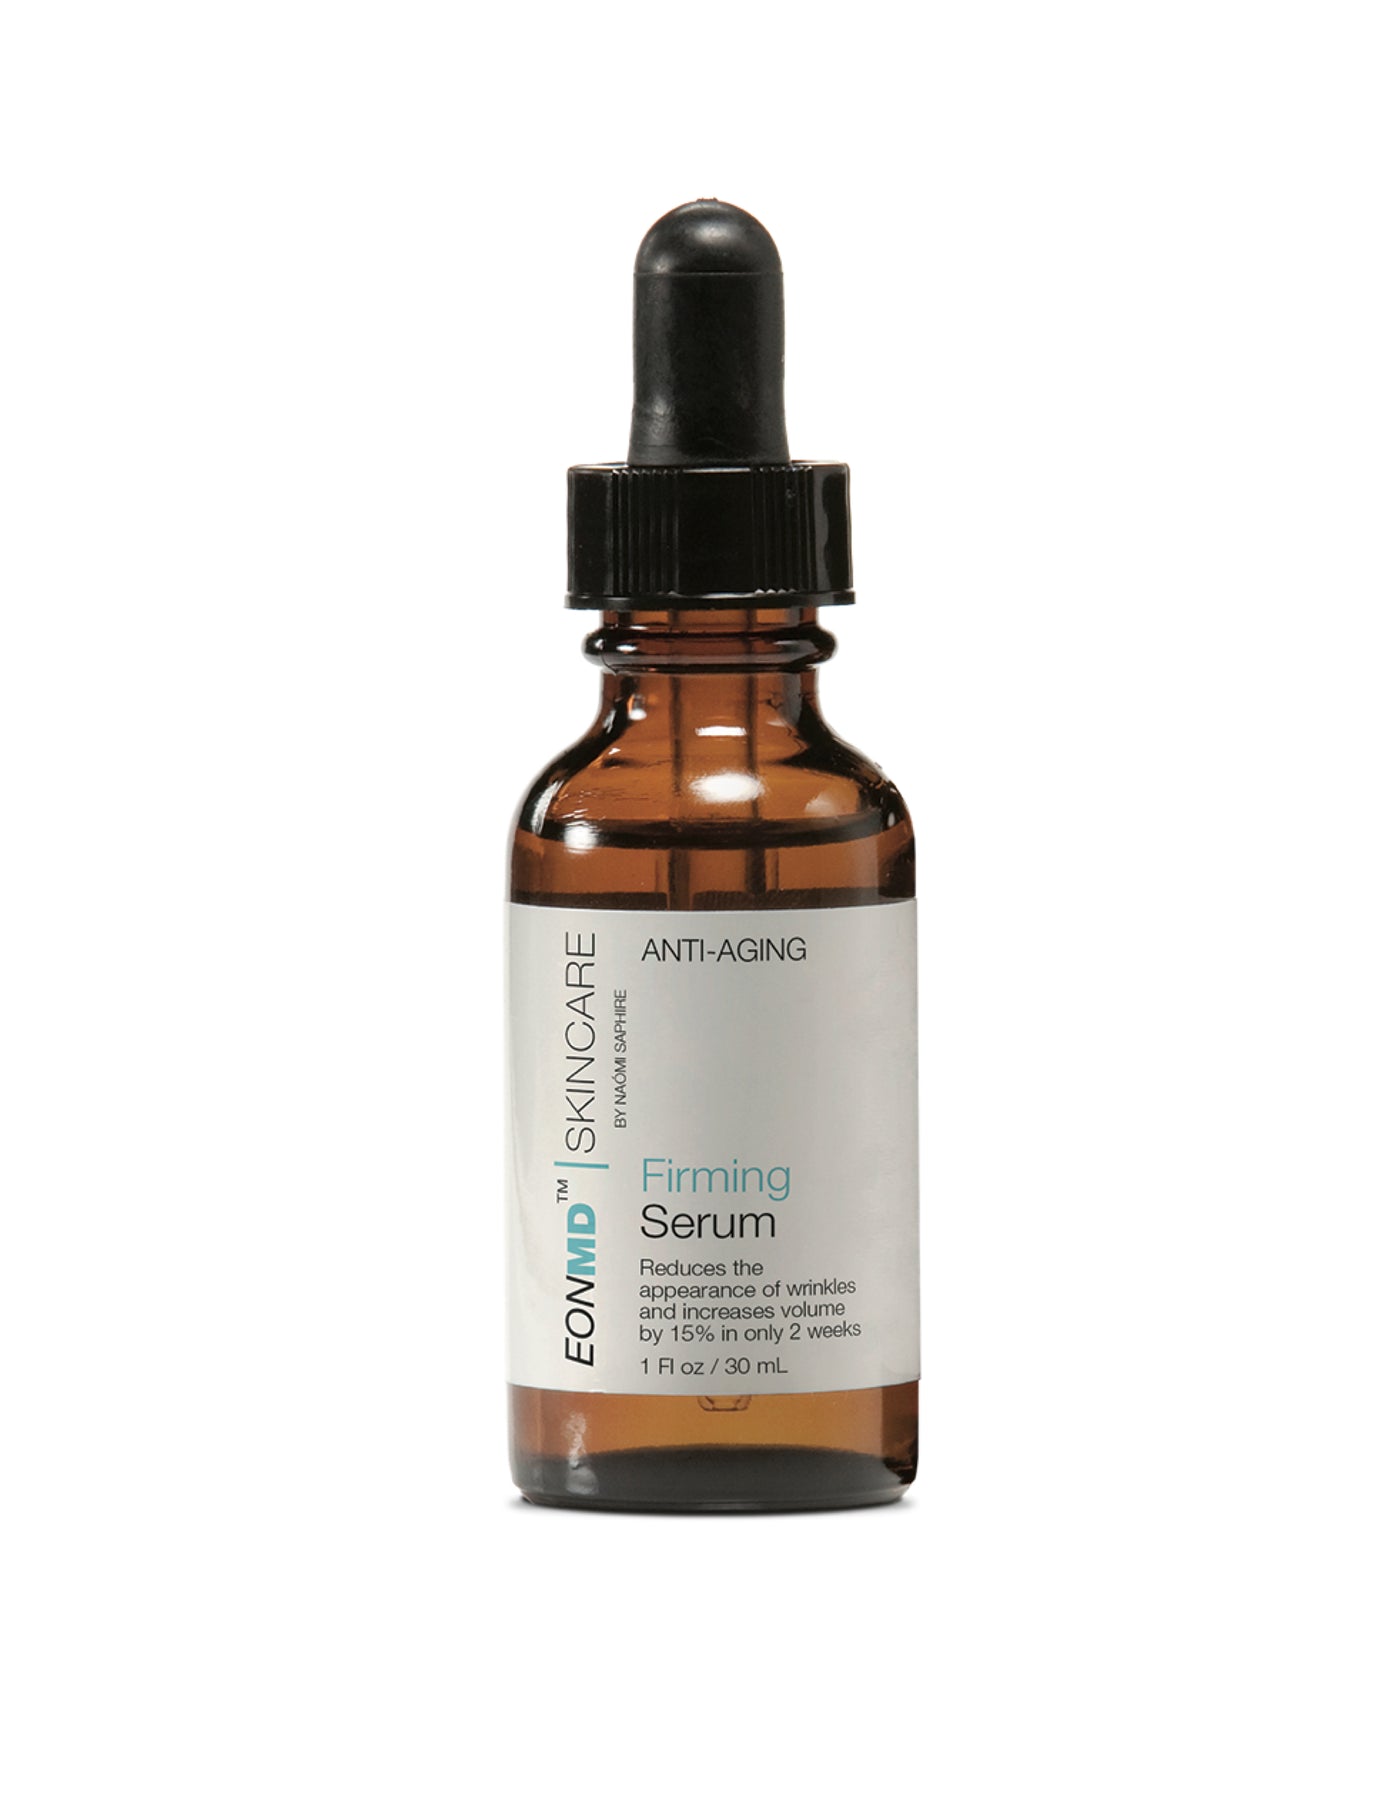 Employing multiple revolutionary active ingredients, Firming Serum is clinically proven to deliver equivalent results to one injection of collagen filler in just two weeks of regular use. The combination of copper, proline, lysine, hyaluronic acid, and Niacinamide triggers the production of energy in the mitochondria of the senescent fibroblast, safely reactivating collagen I, collagen III, and elastin production.